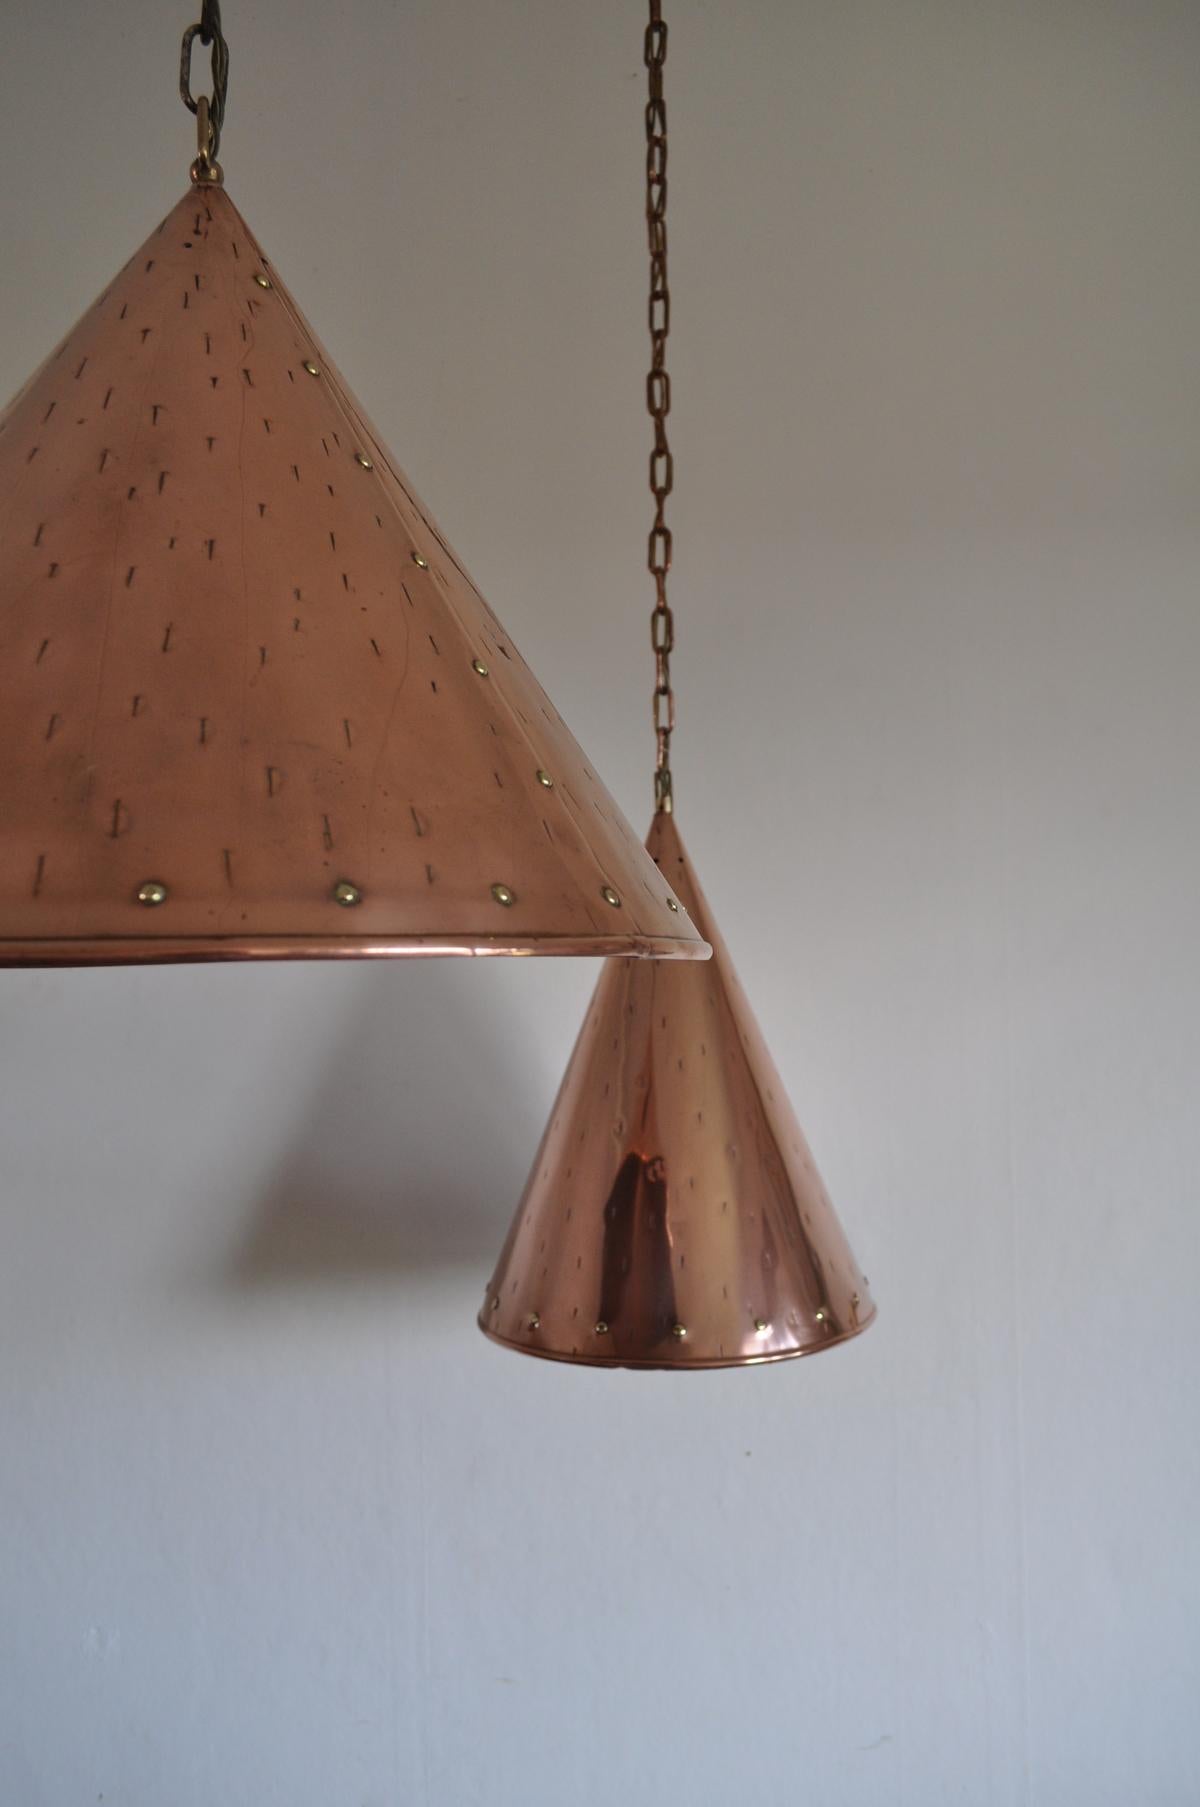 A set of 2 handcrafted Danish cone shaped copper pendent lamps with beautiful brass details. Made in Denmark in the 1970s.

Signs of wear consistent with age and use.

Measures: Height 38,5 cm, diameter 29 cm.
Height 35 cm, diameter 41,5